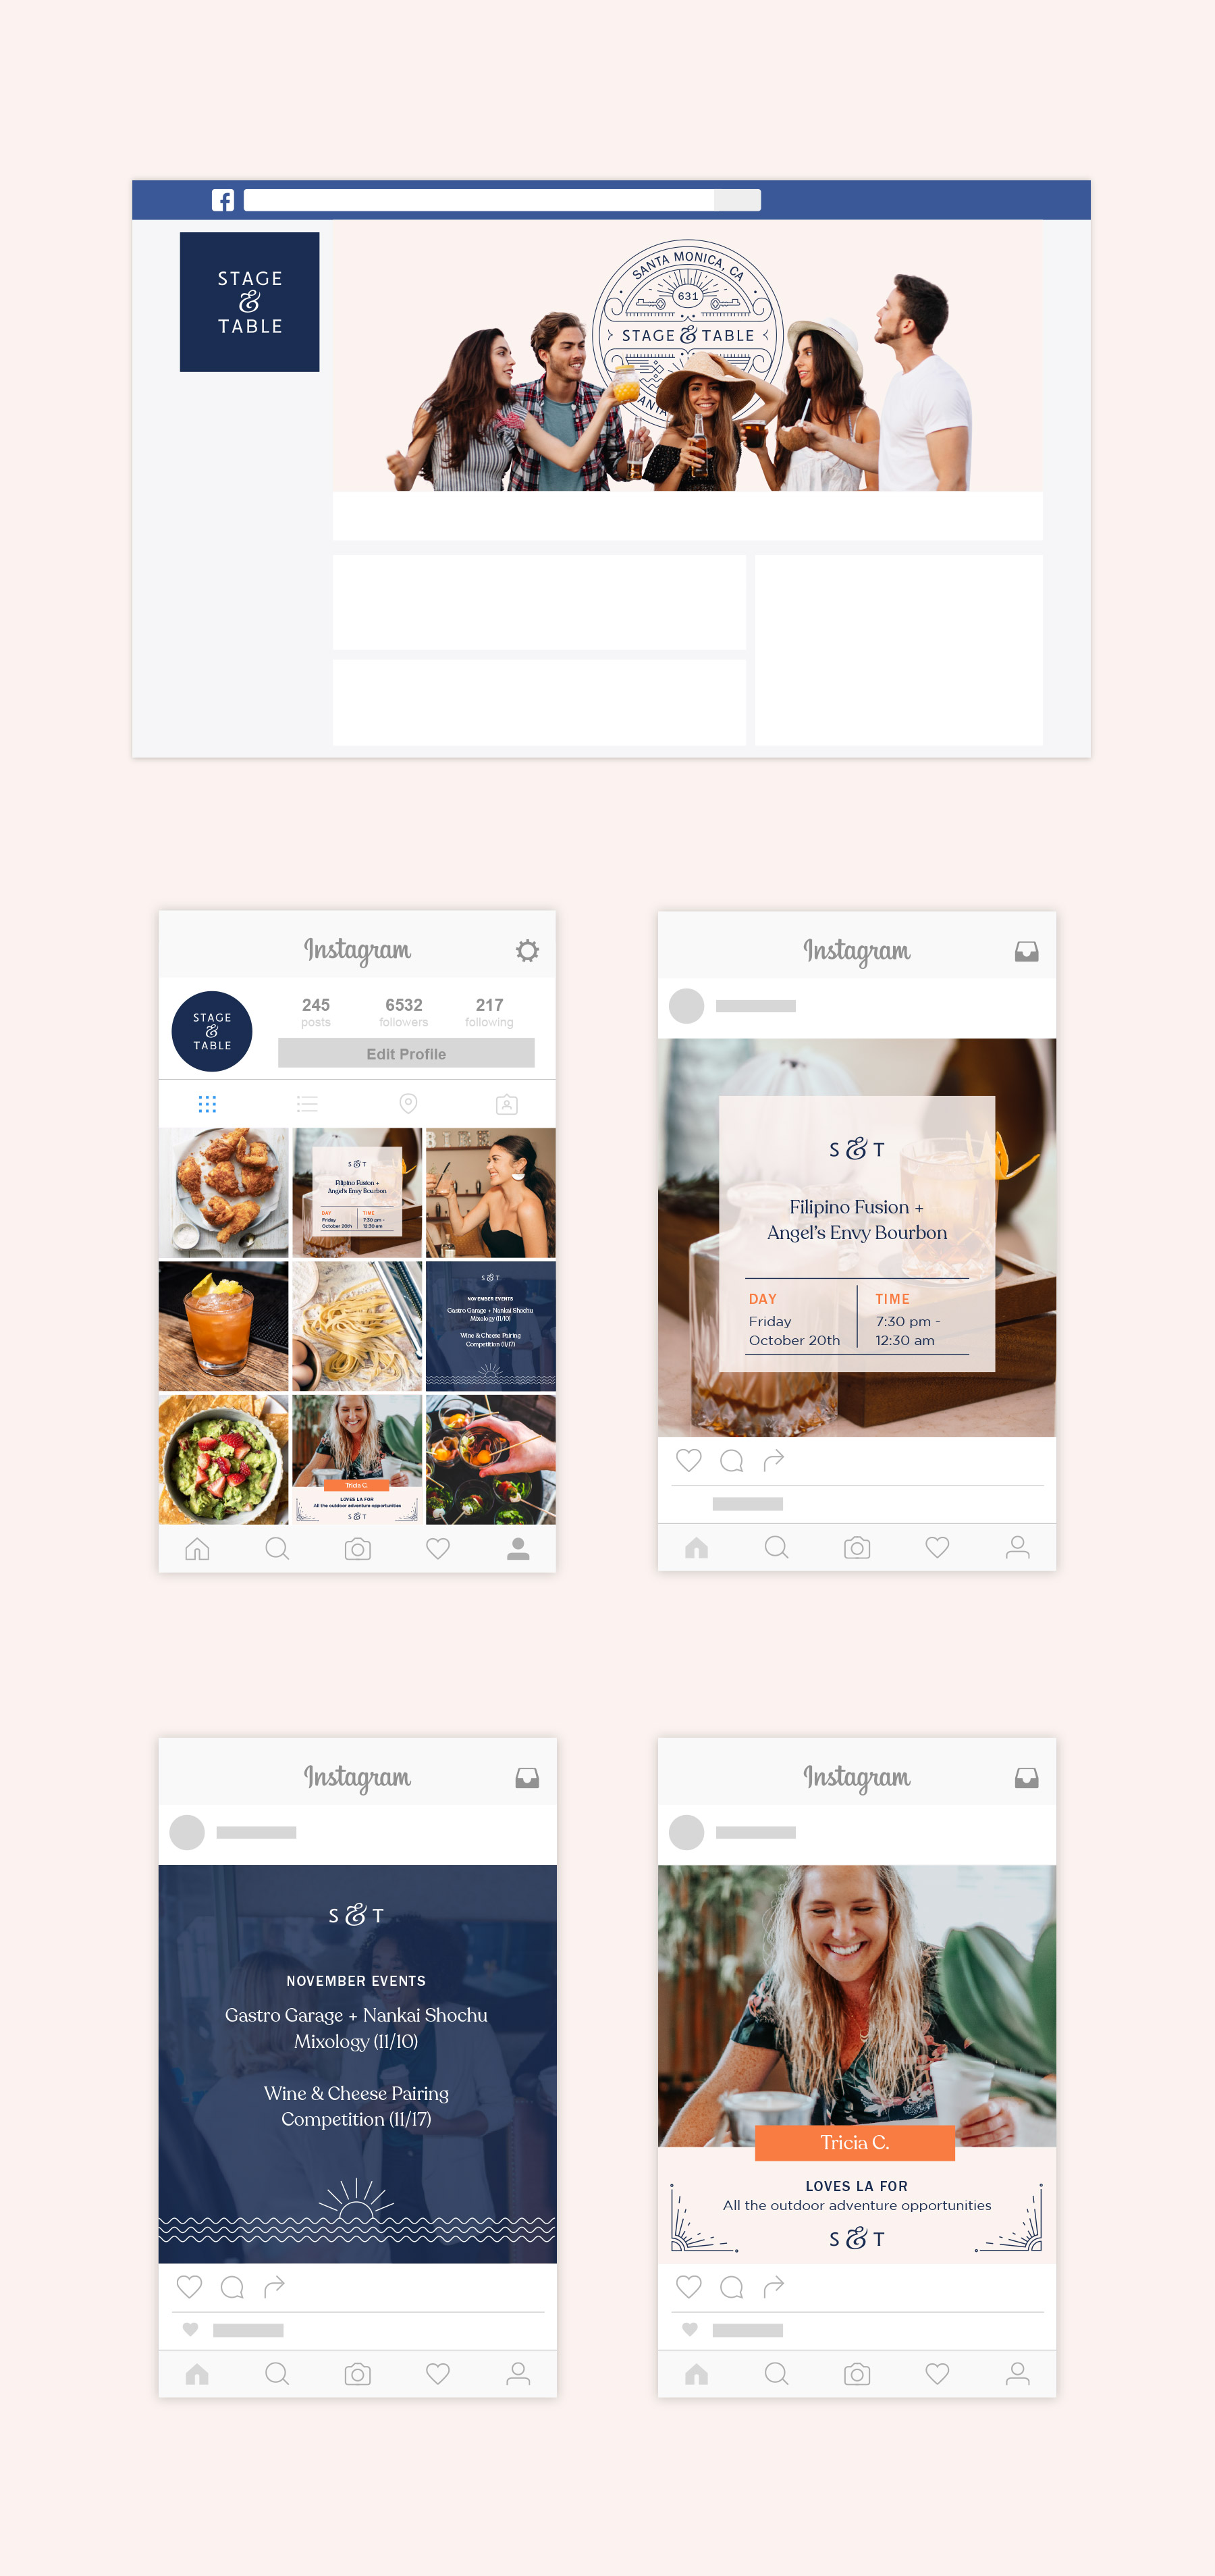 Instagram marketing campaigns for restaurants, brewery's, and social clubs